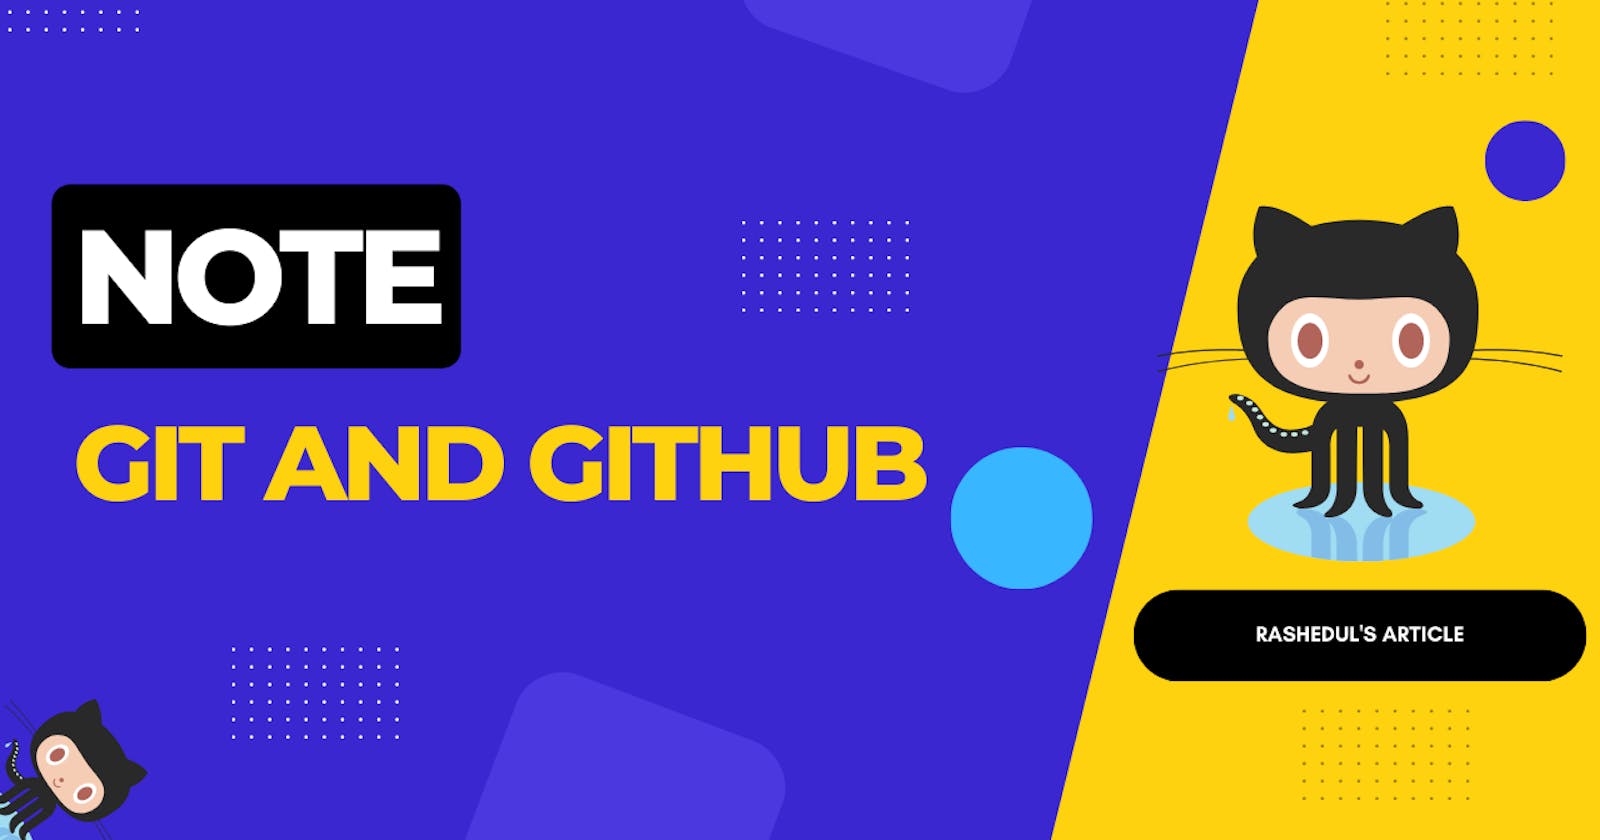 short note about Basic Git and GitHub